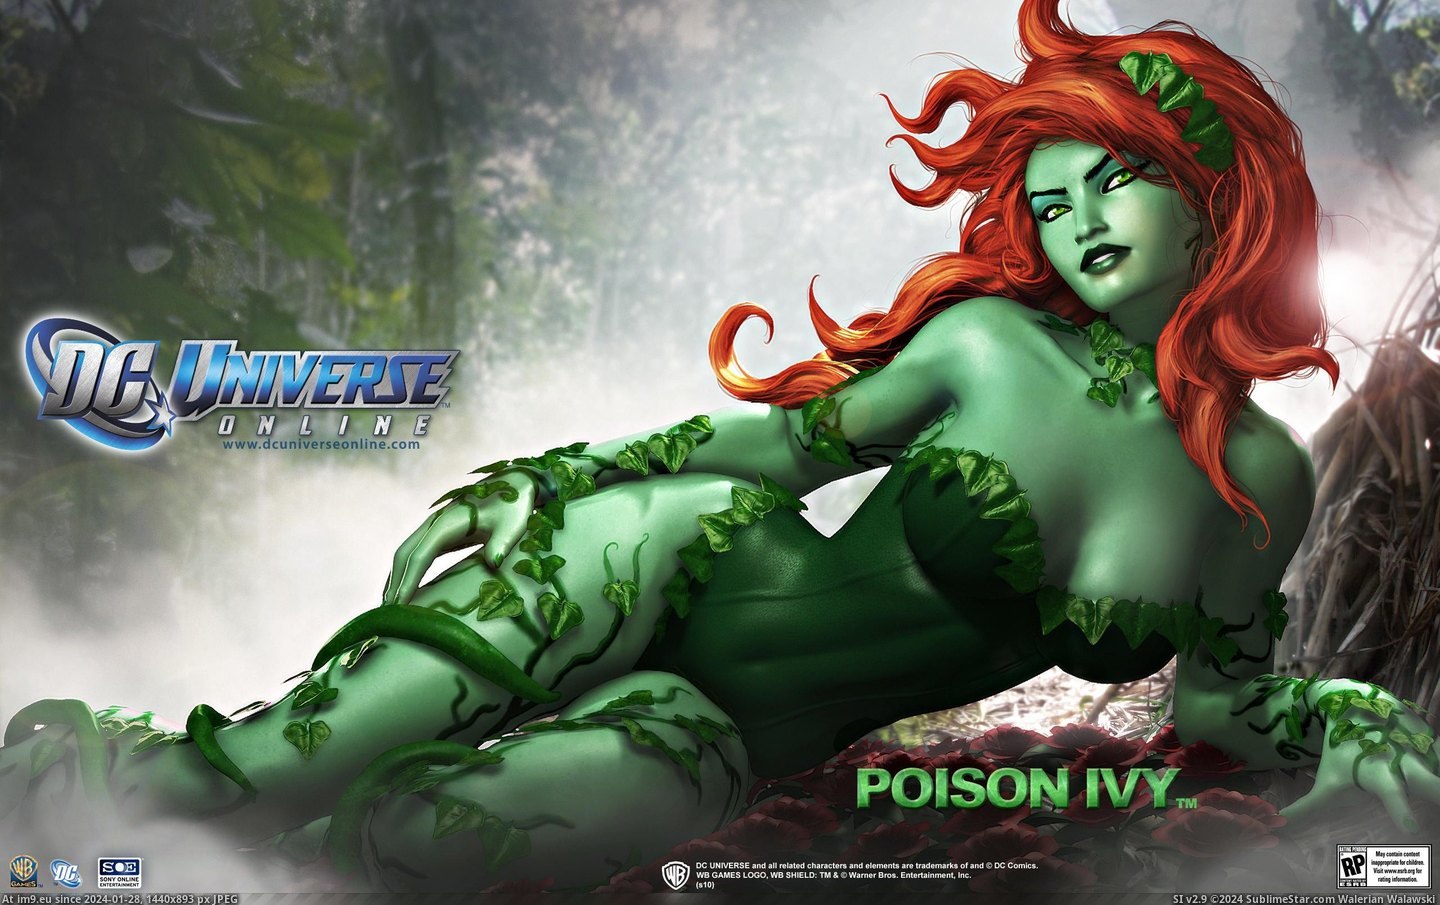 #Wallpaper #Wide #Universe #Poison #Ivy Dc Universe Poison Ivy Wide HD Wallpaper Pic. (Image of album Unique HD Wallpapers))